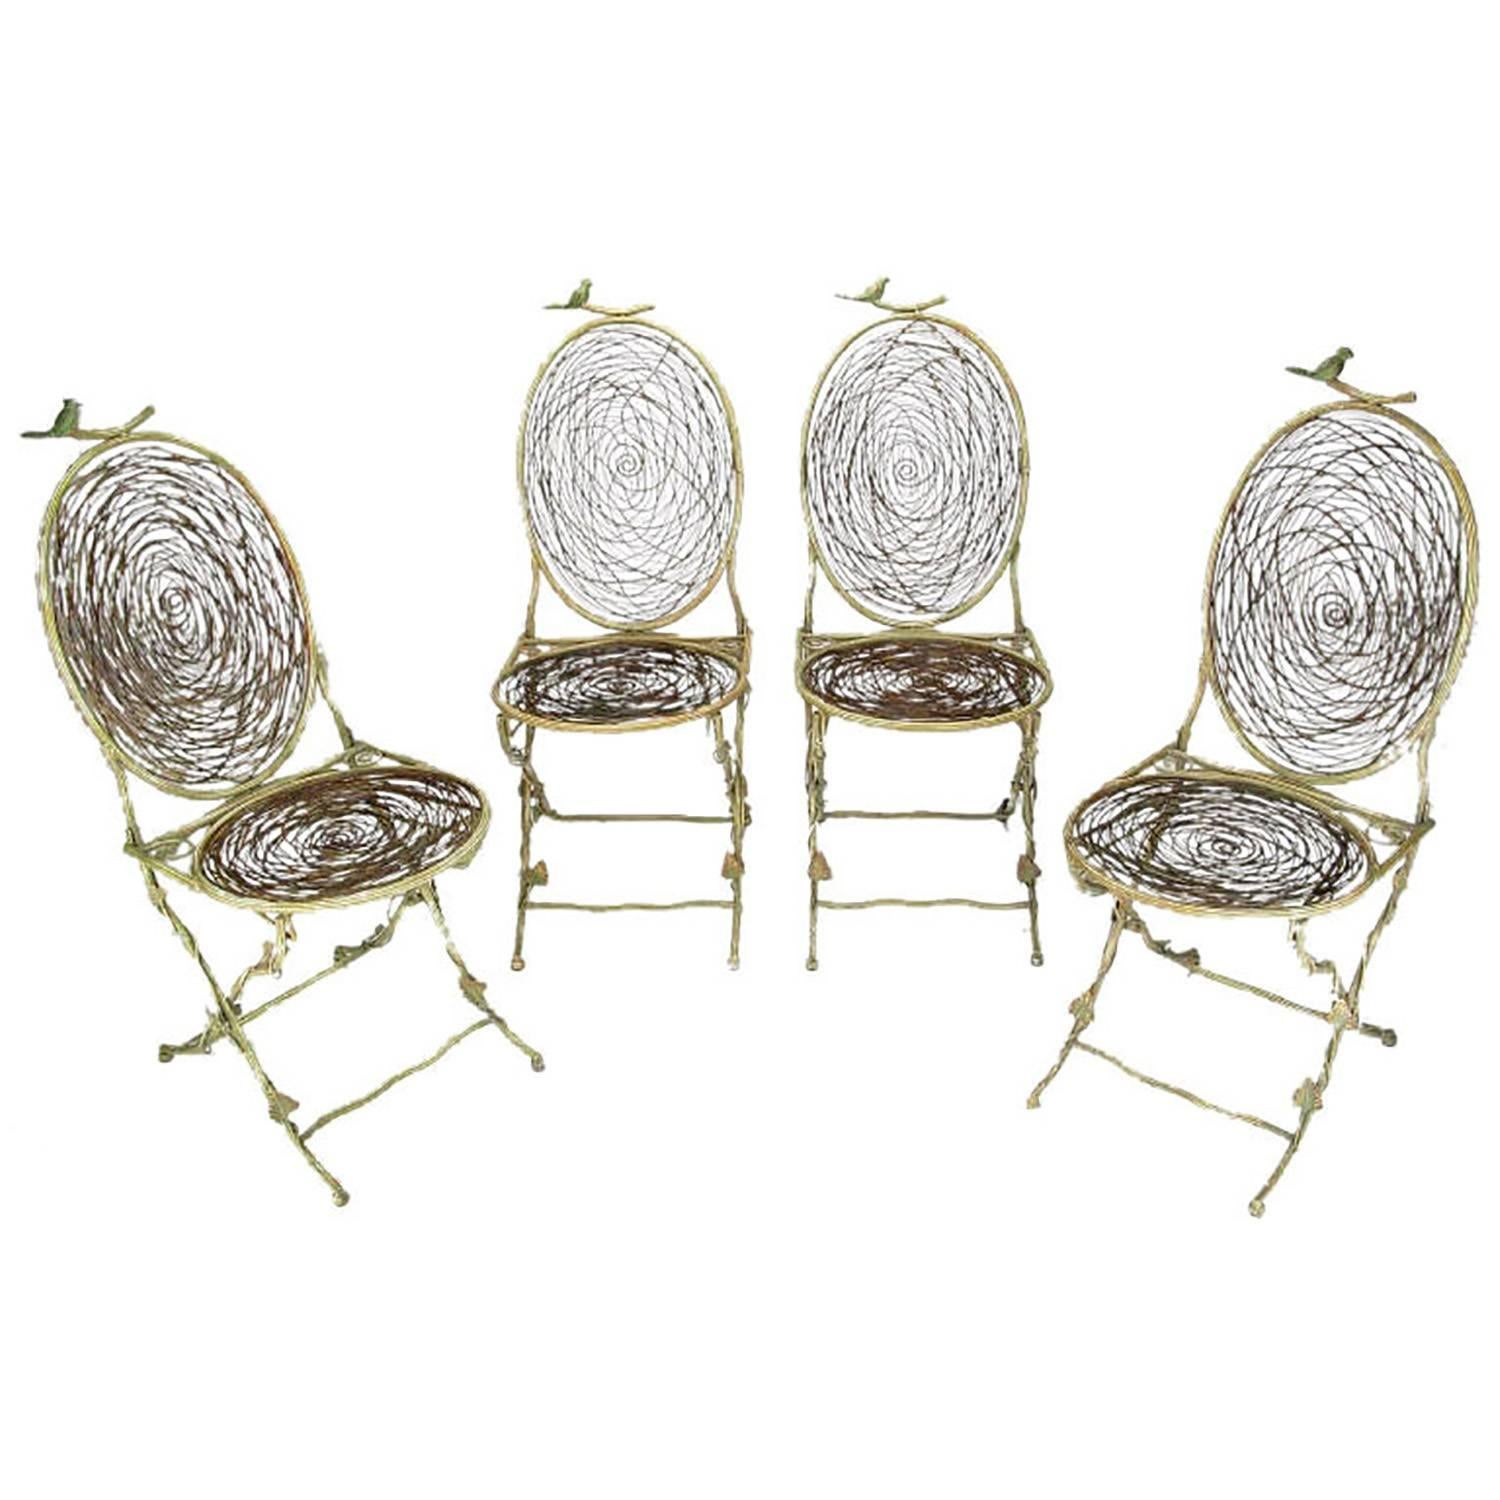 Four Iron Faux Bois Folding Chairs with Bird Nest Seats and Backs